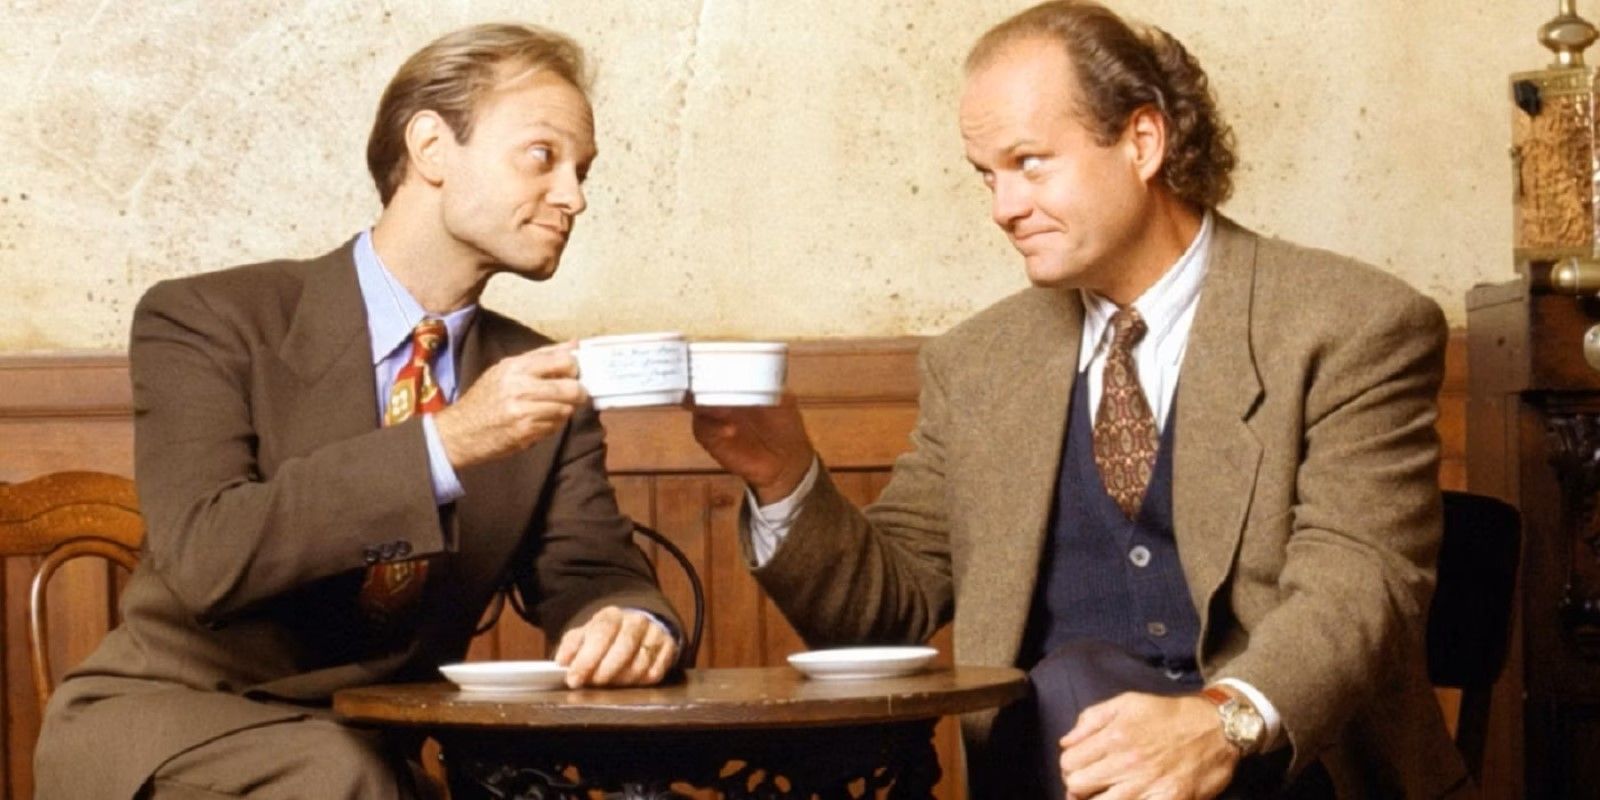 Frasier and Niles Crane sitting at a table